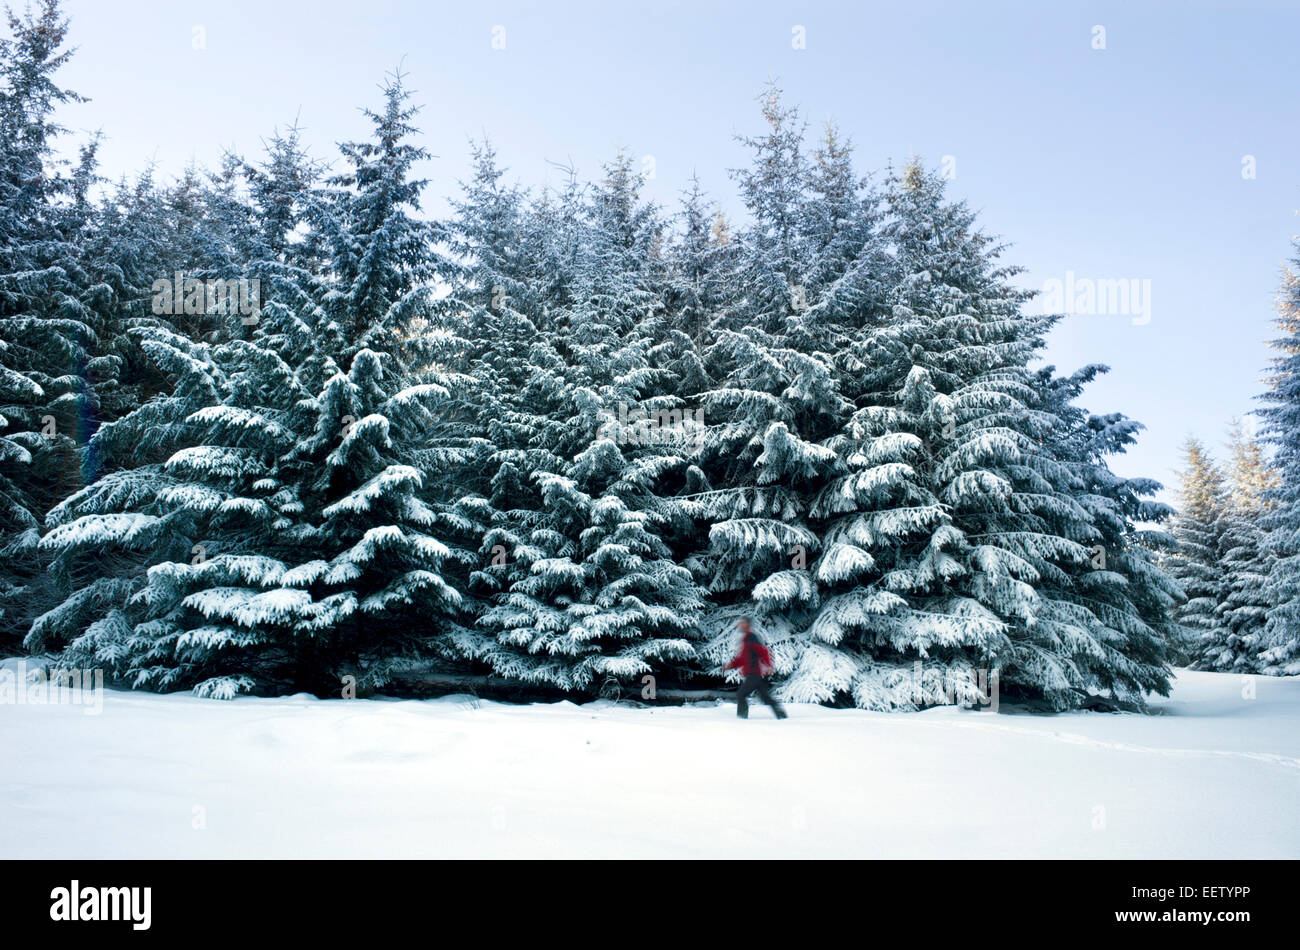 A blurred lone walker dwarfed by a stand of pine trees in the middle of a snow covered plantation after an overnight shower Stock Photo